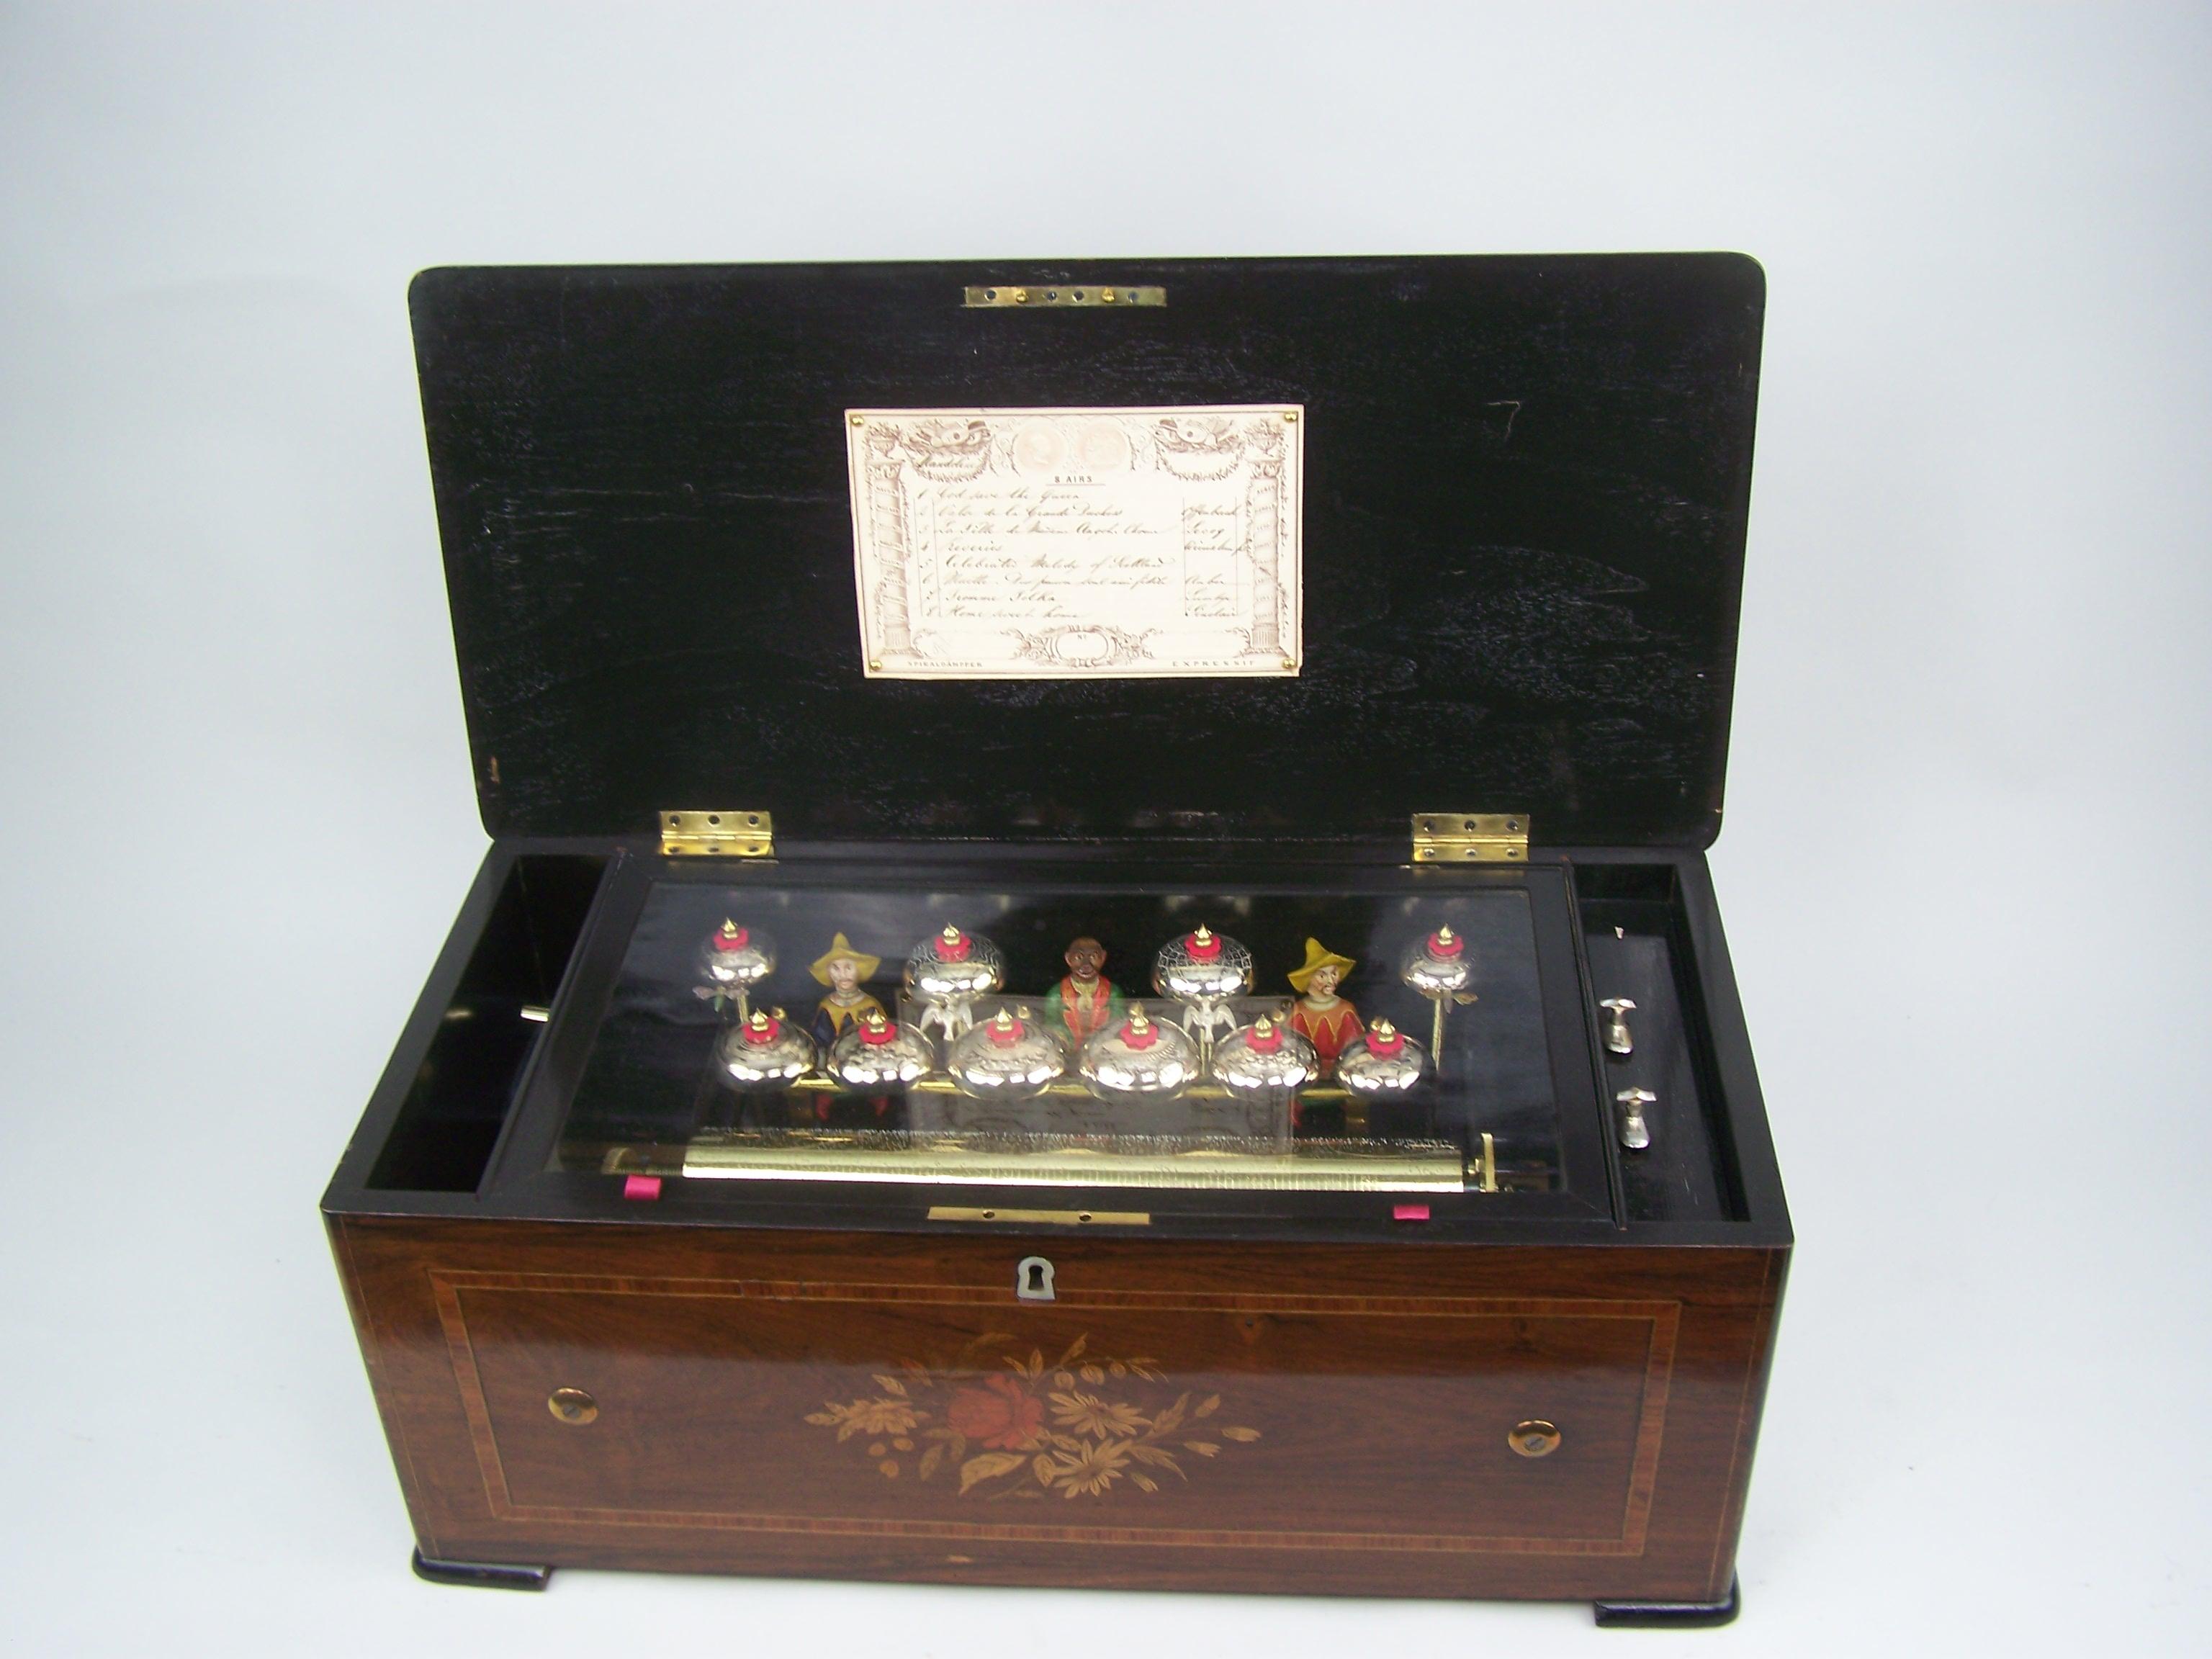 Woodwork Music Box with Automatons and Bells made by Karrer For Sale